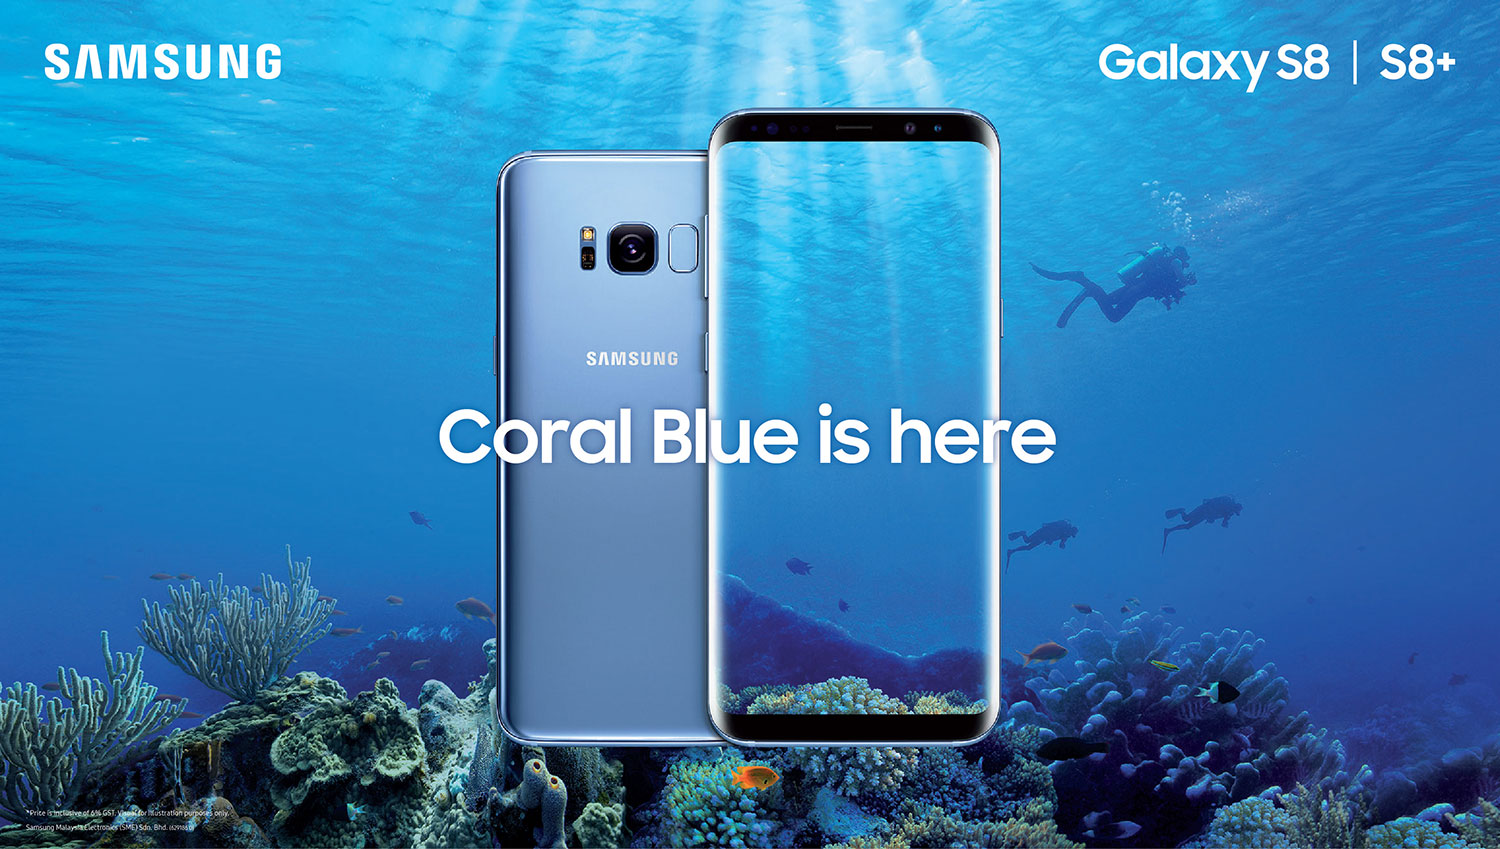 Samsung Galaxy S8 and S8+ Coral Blue